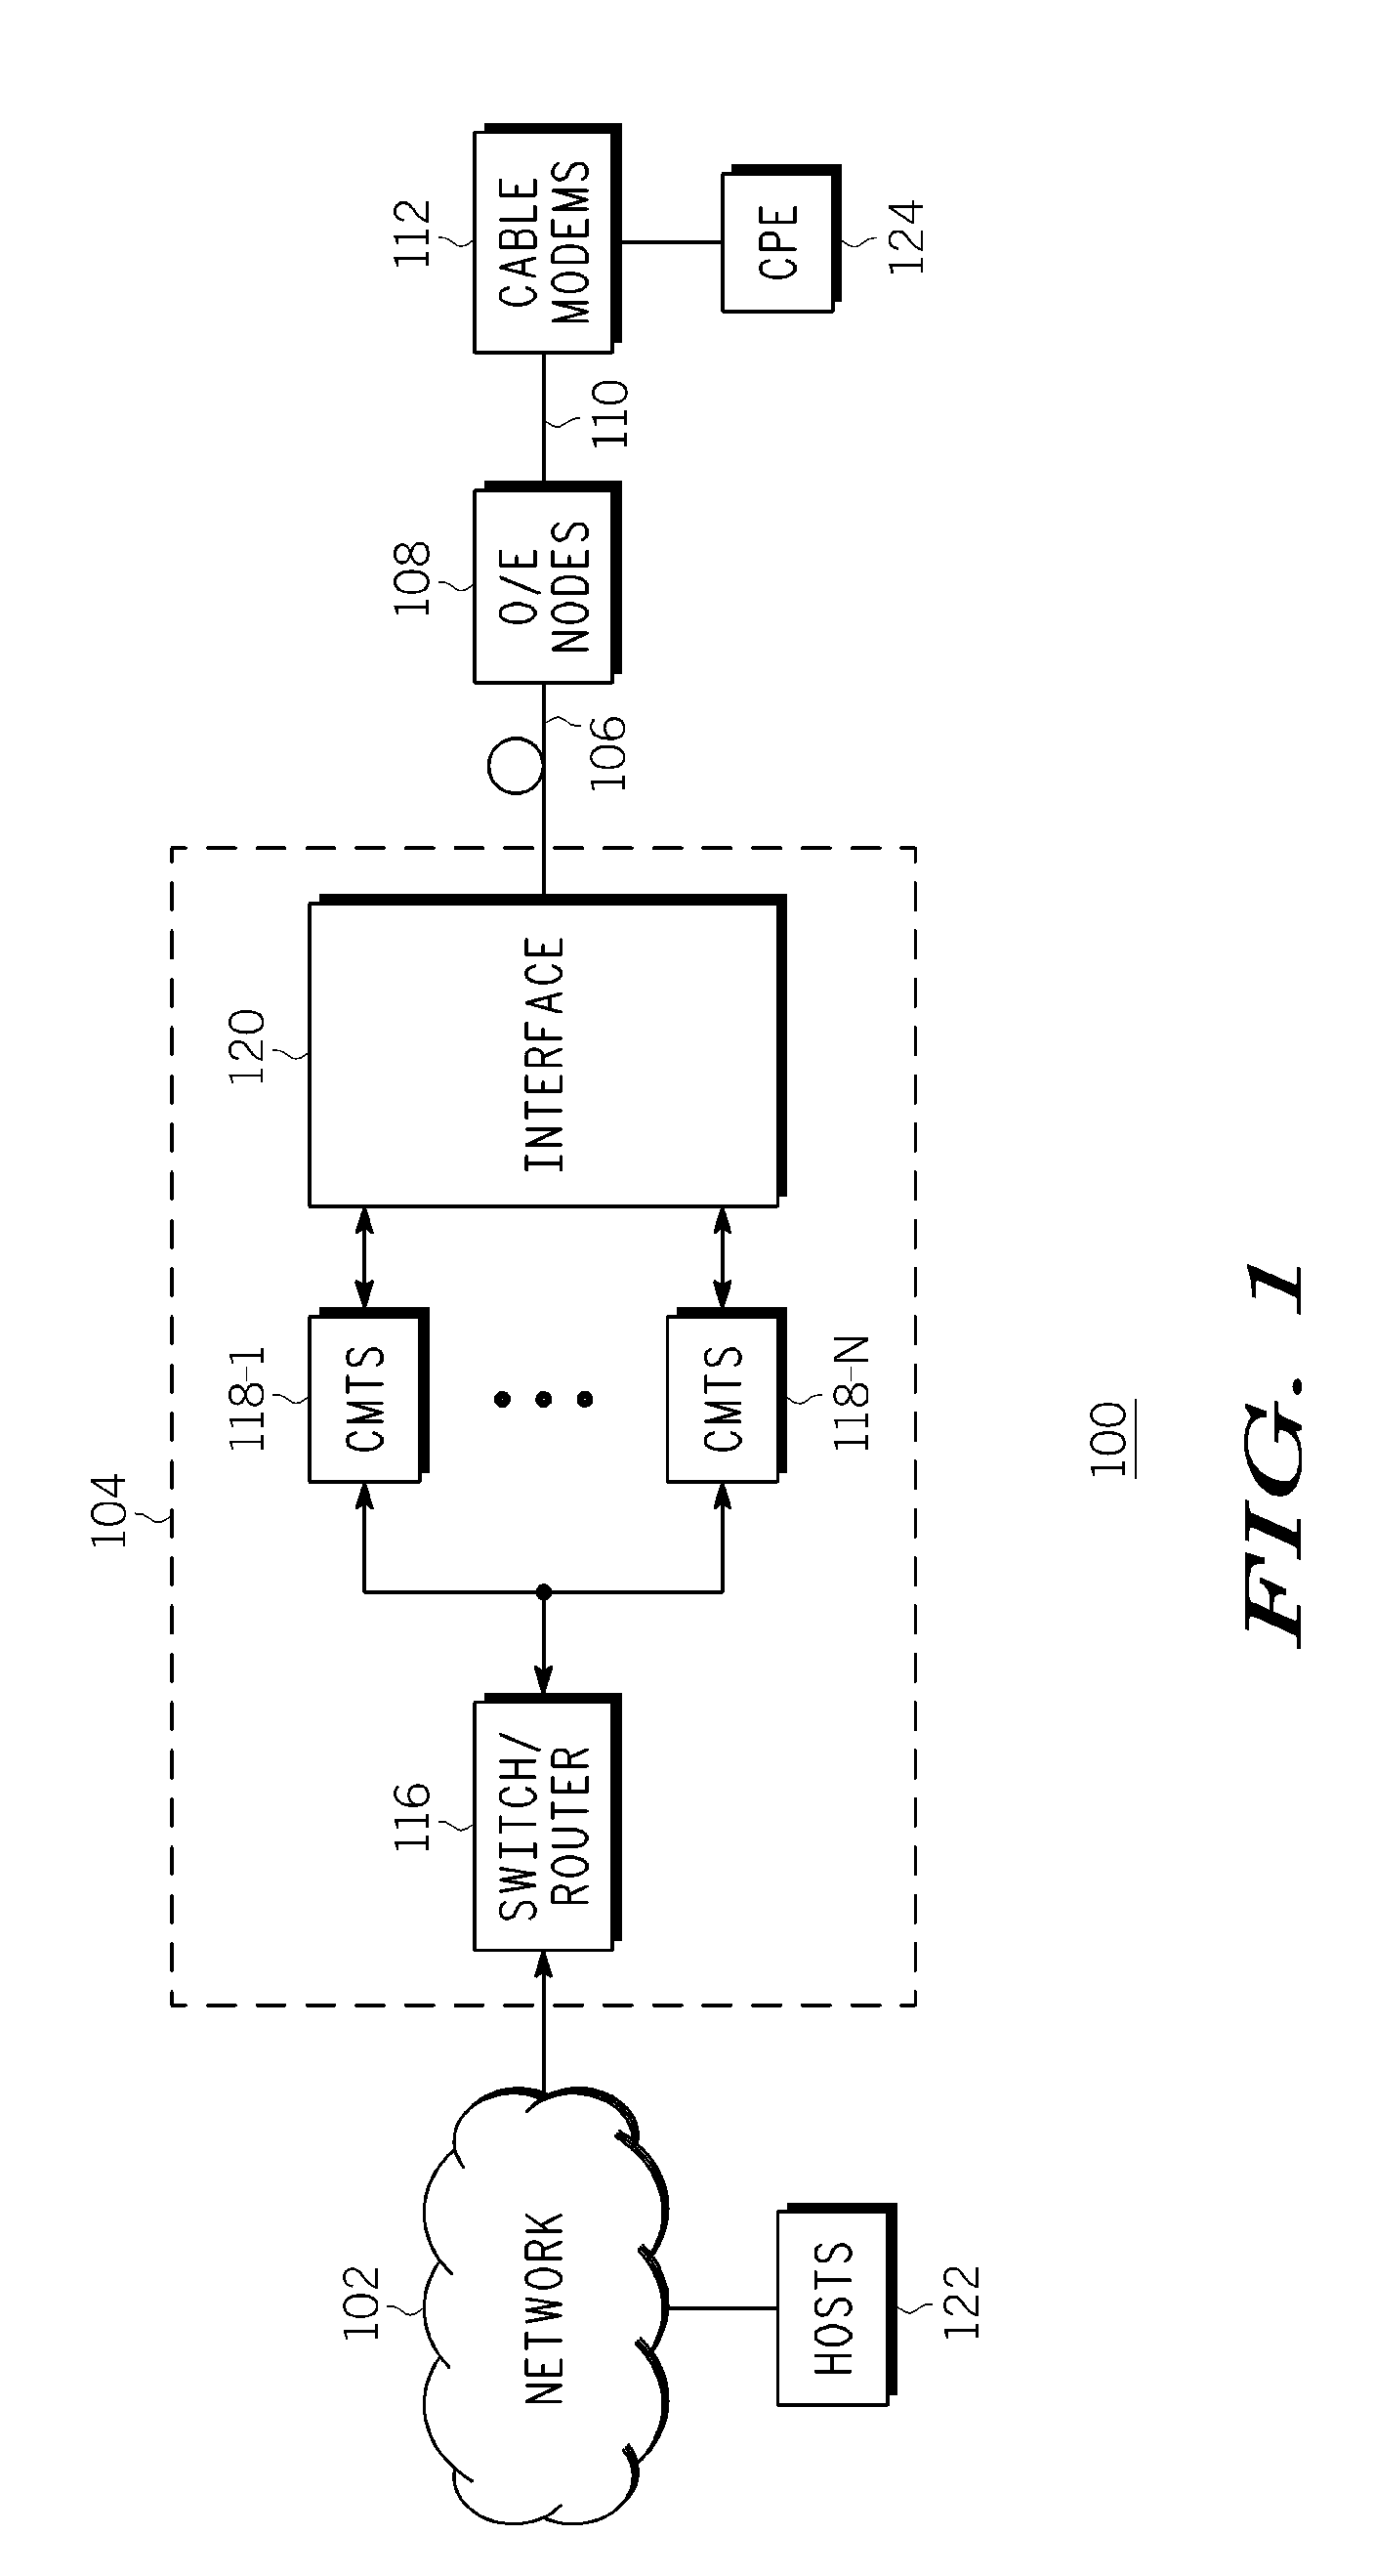 Method and Apparatus for Facilitating Downstream Frequency Override in a Data-Over-Cable System